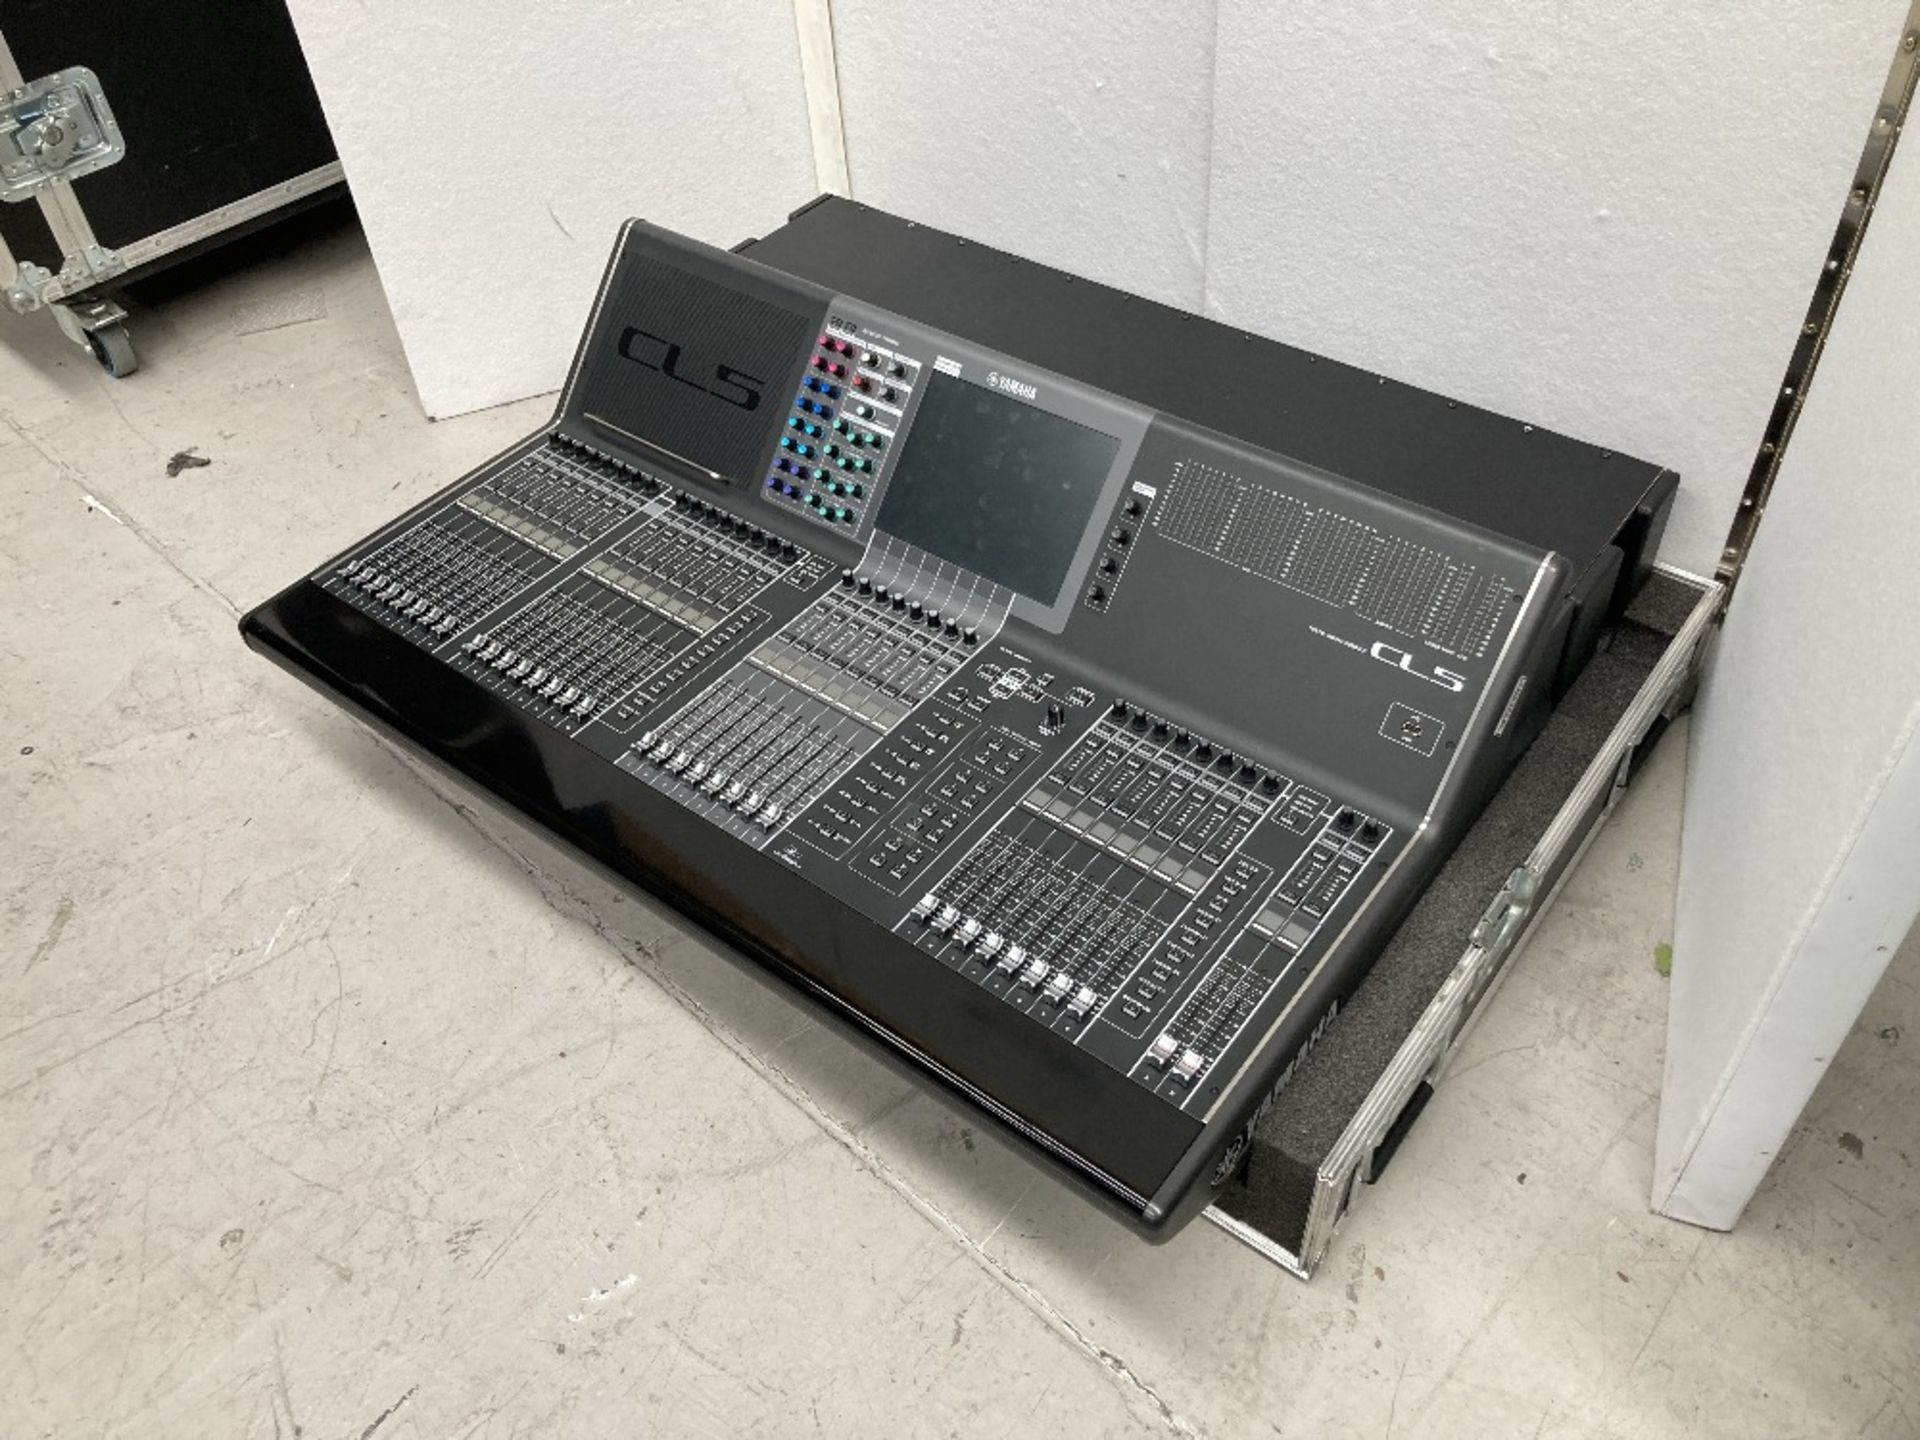 Yamaha CL5 Digital Mixing Console & Heavy Duty Mobile Flight Case - Image 4 of 15